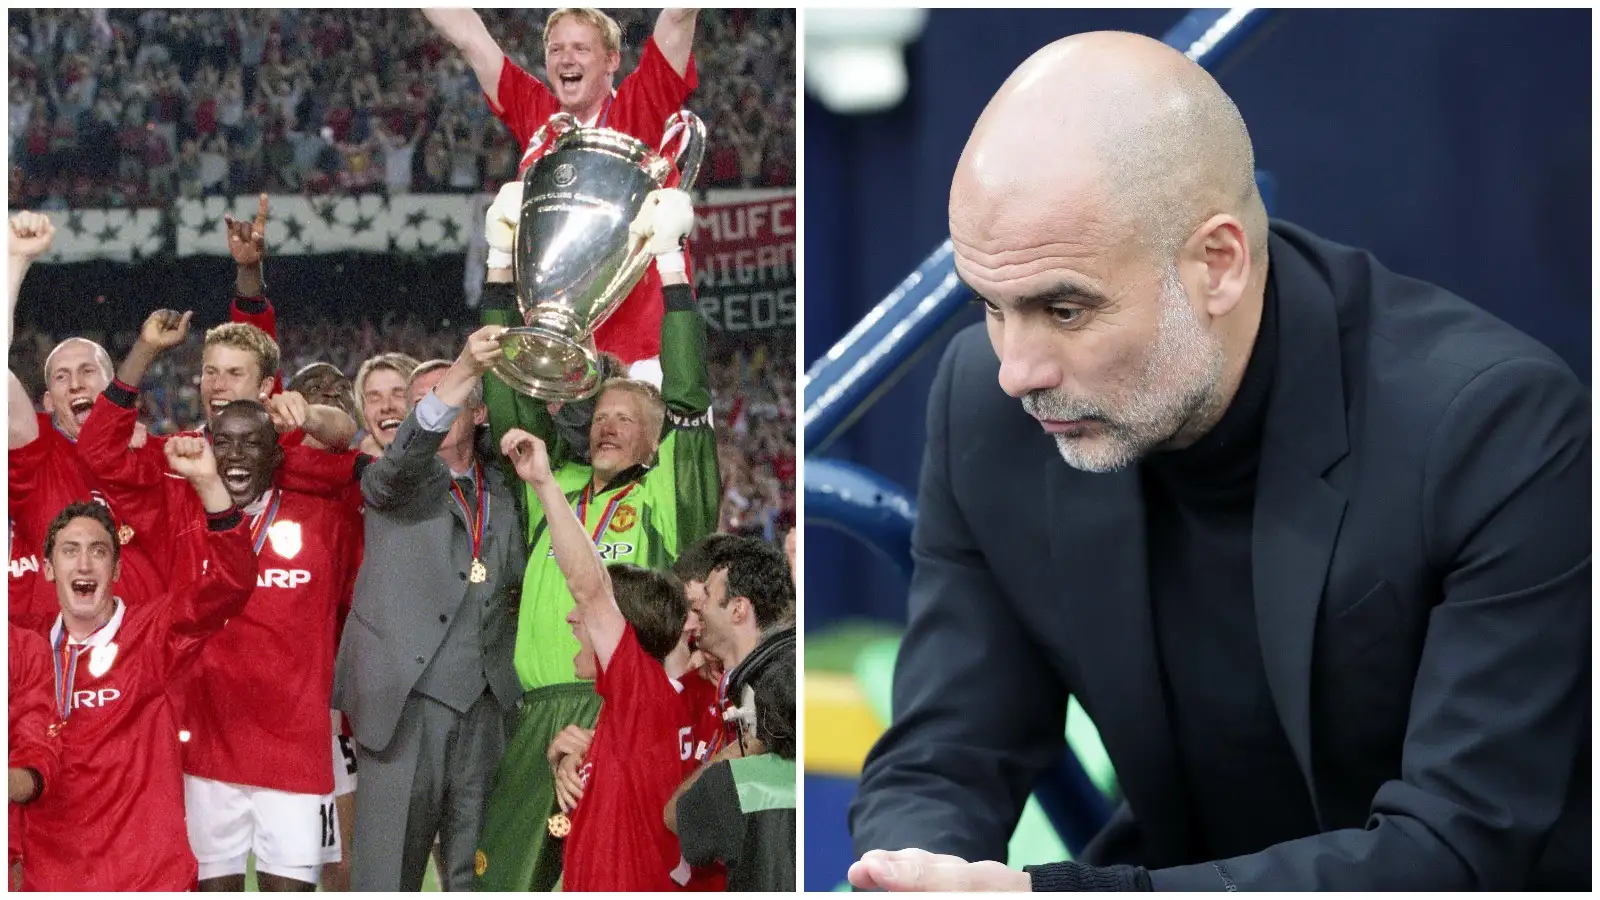 Manchester United lift the Champions League trophy in 1999 alongside an image of pensive Pep Guardiola.